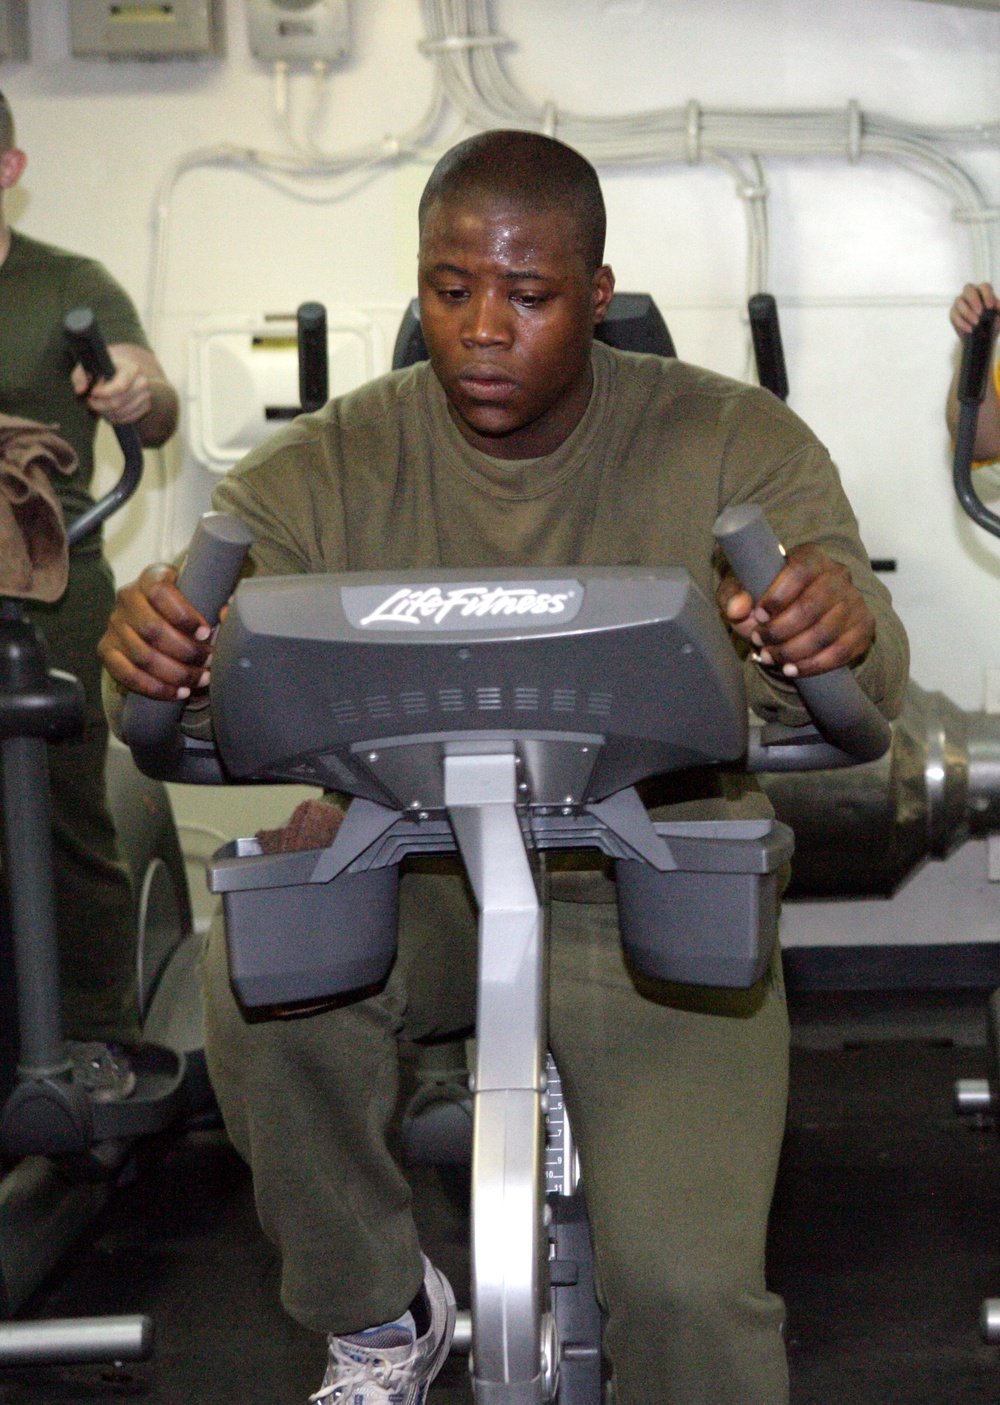 Marines and Sailors Work Out Aboard USS Bataan